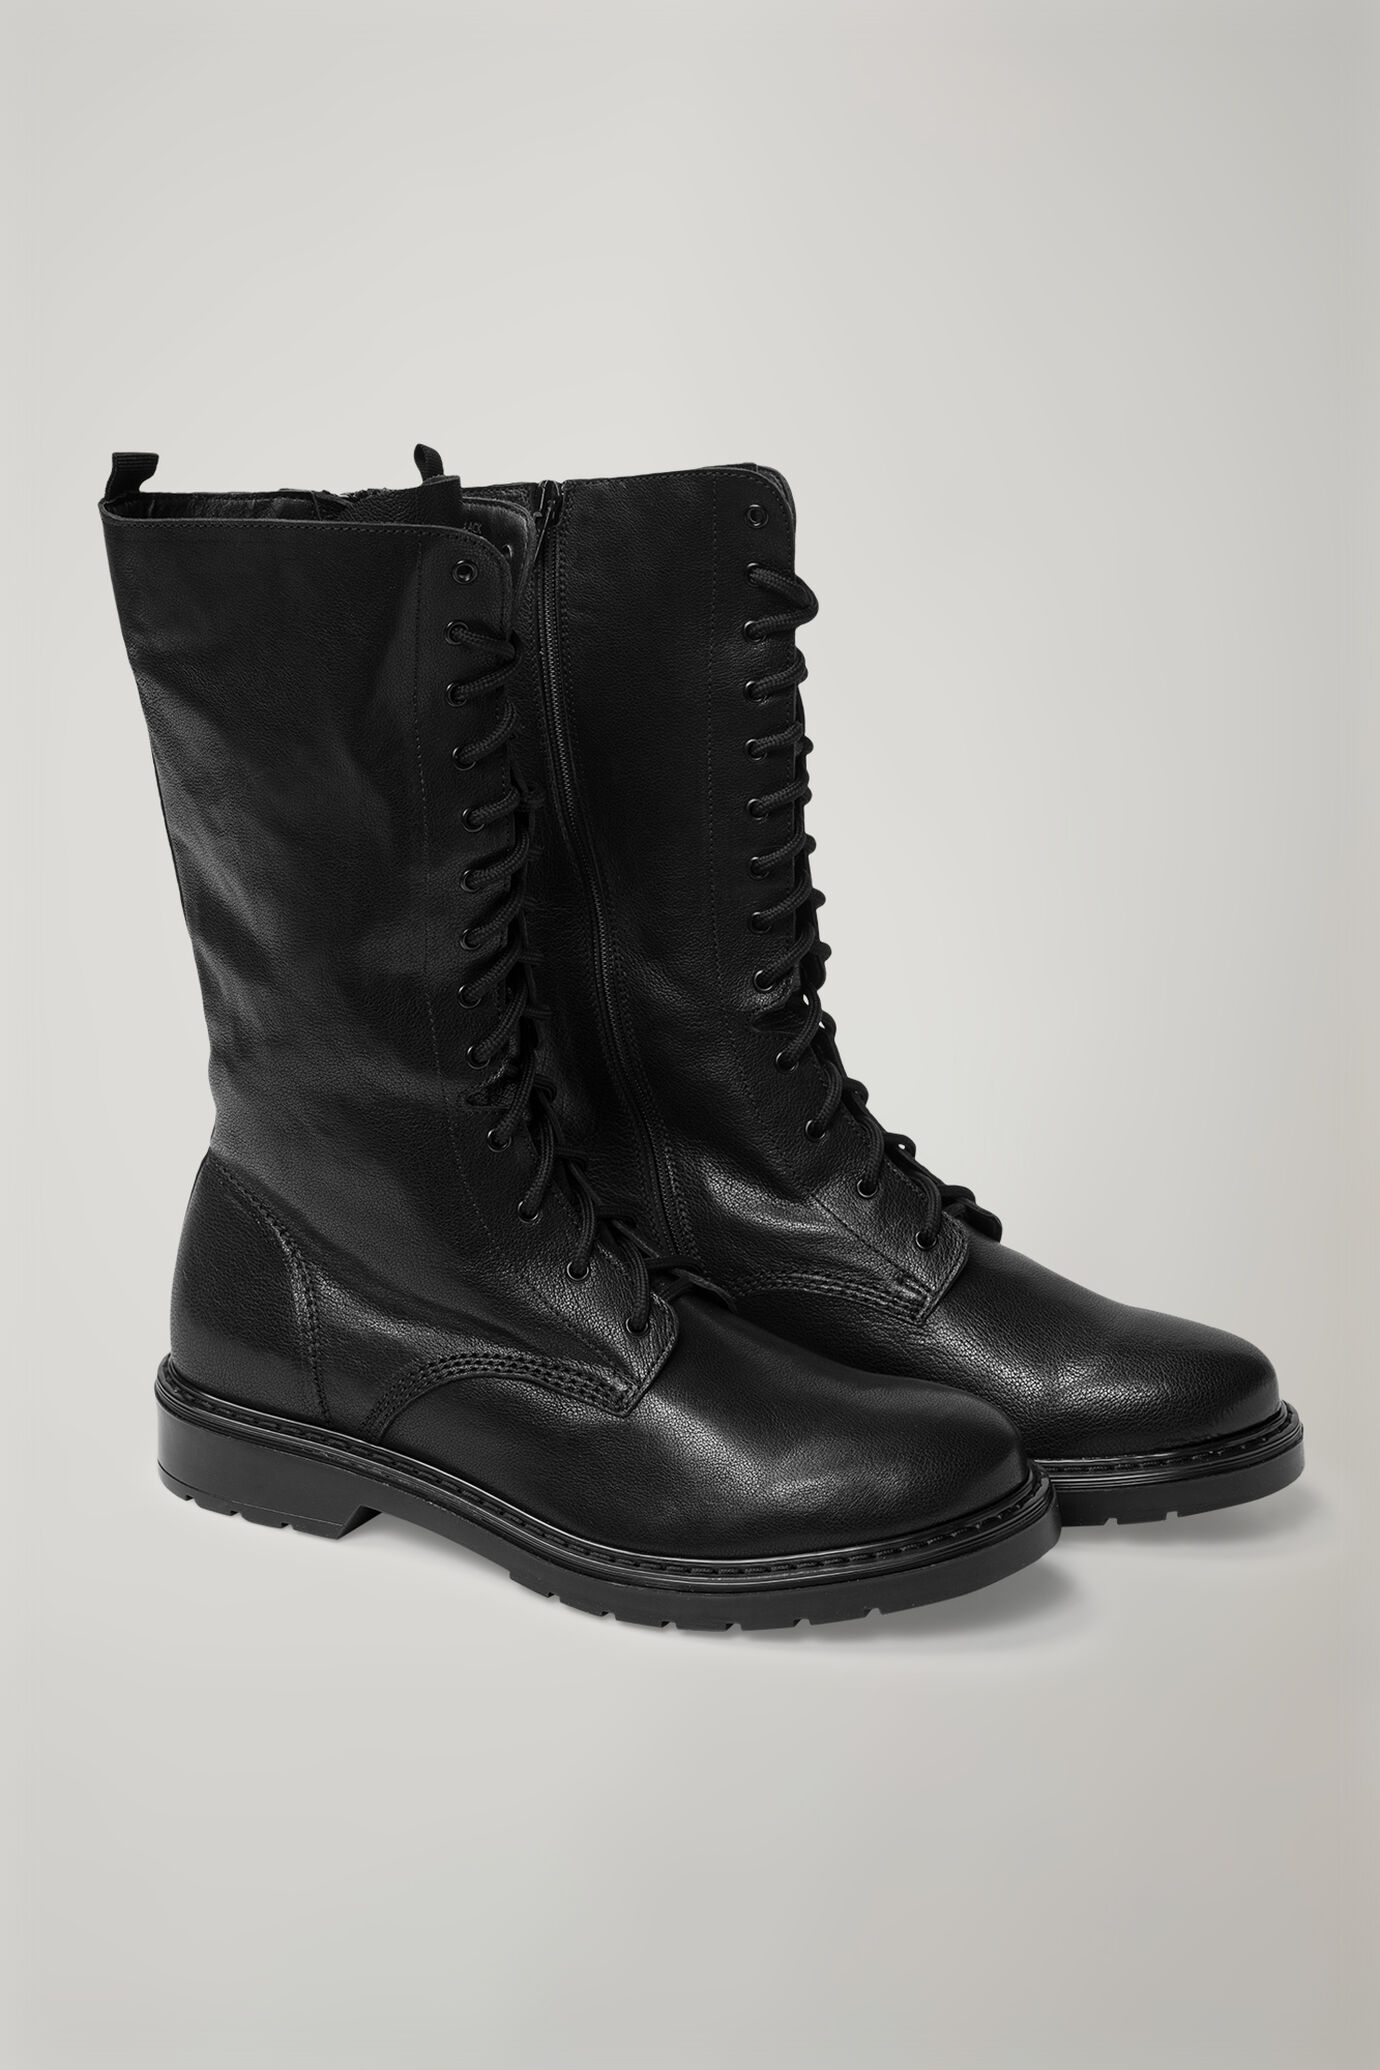 Women's 100% leather amphibious boot with rubber sole